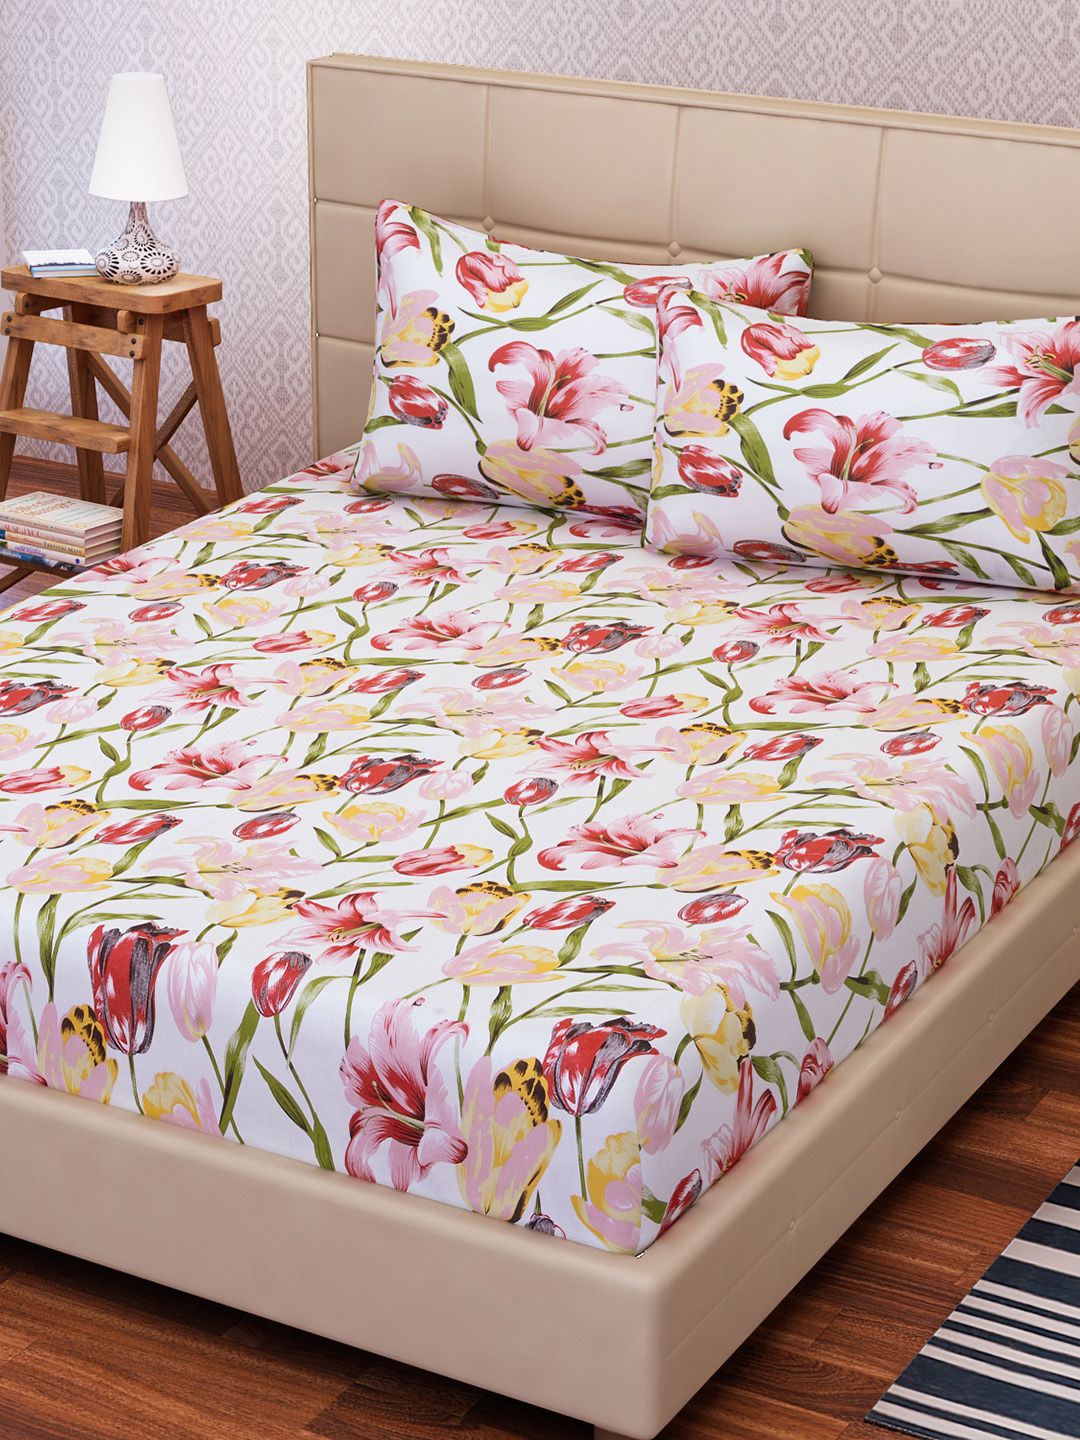 SEJ by Nisha Gupta White & Pink Cotton 144 TC Double King Bedsheet With 2 Pillow Covers